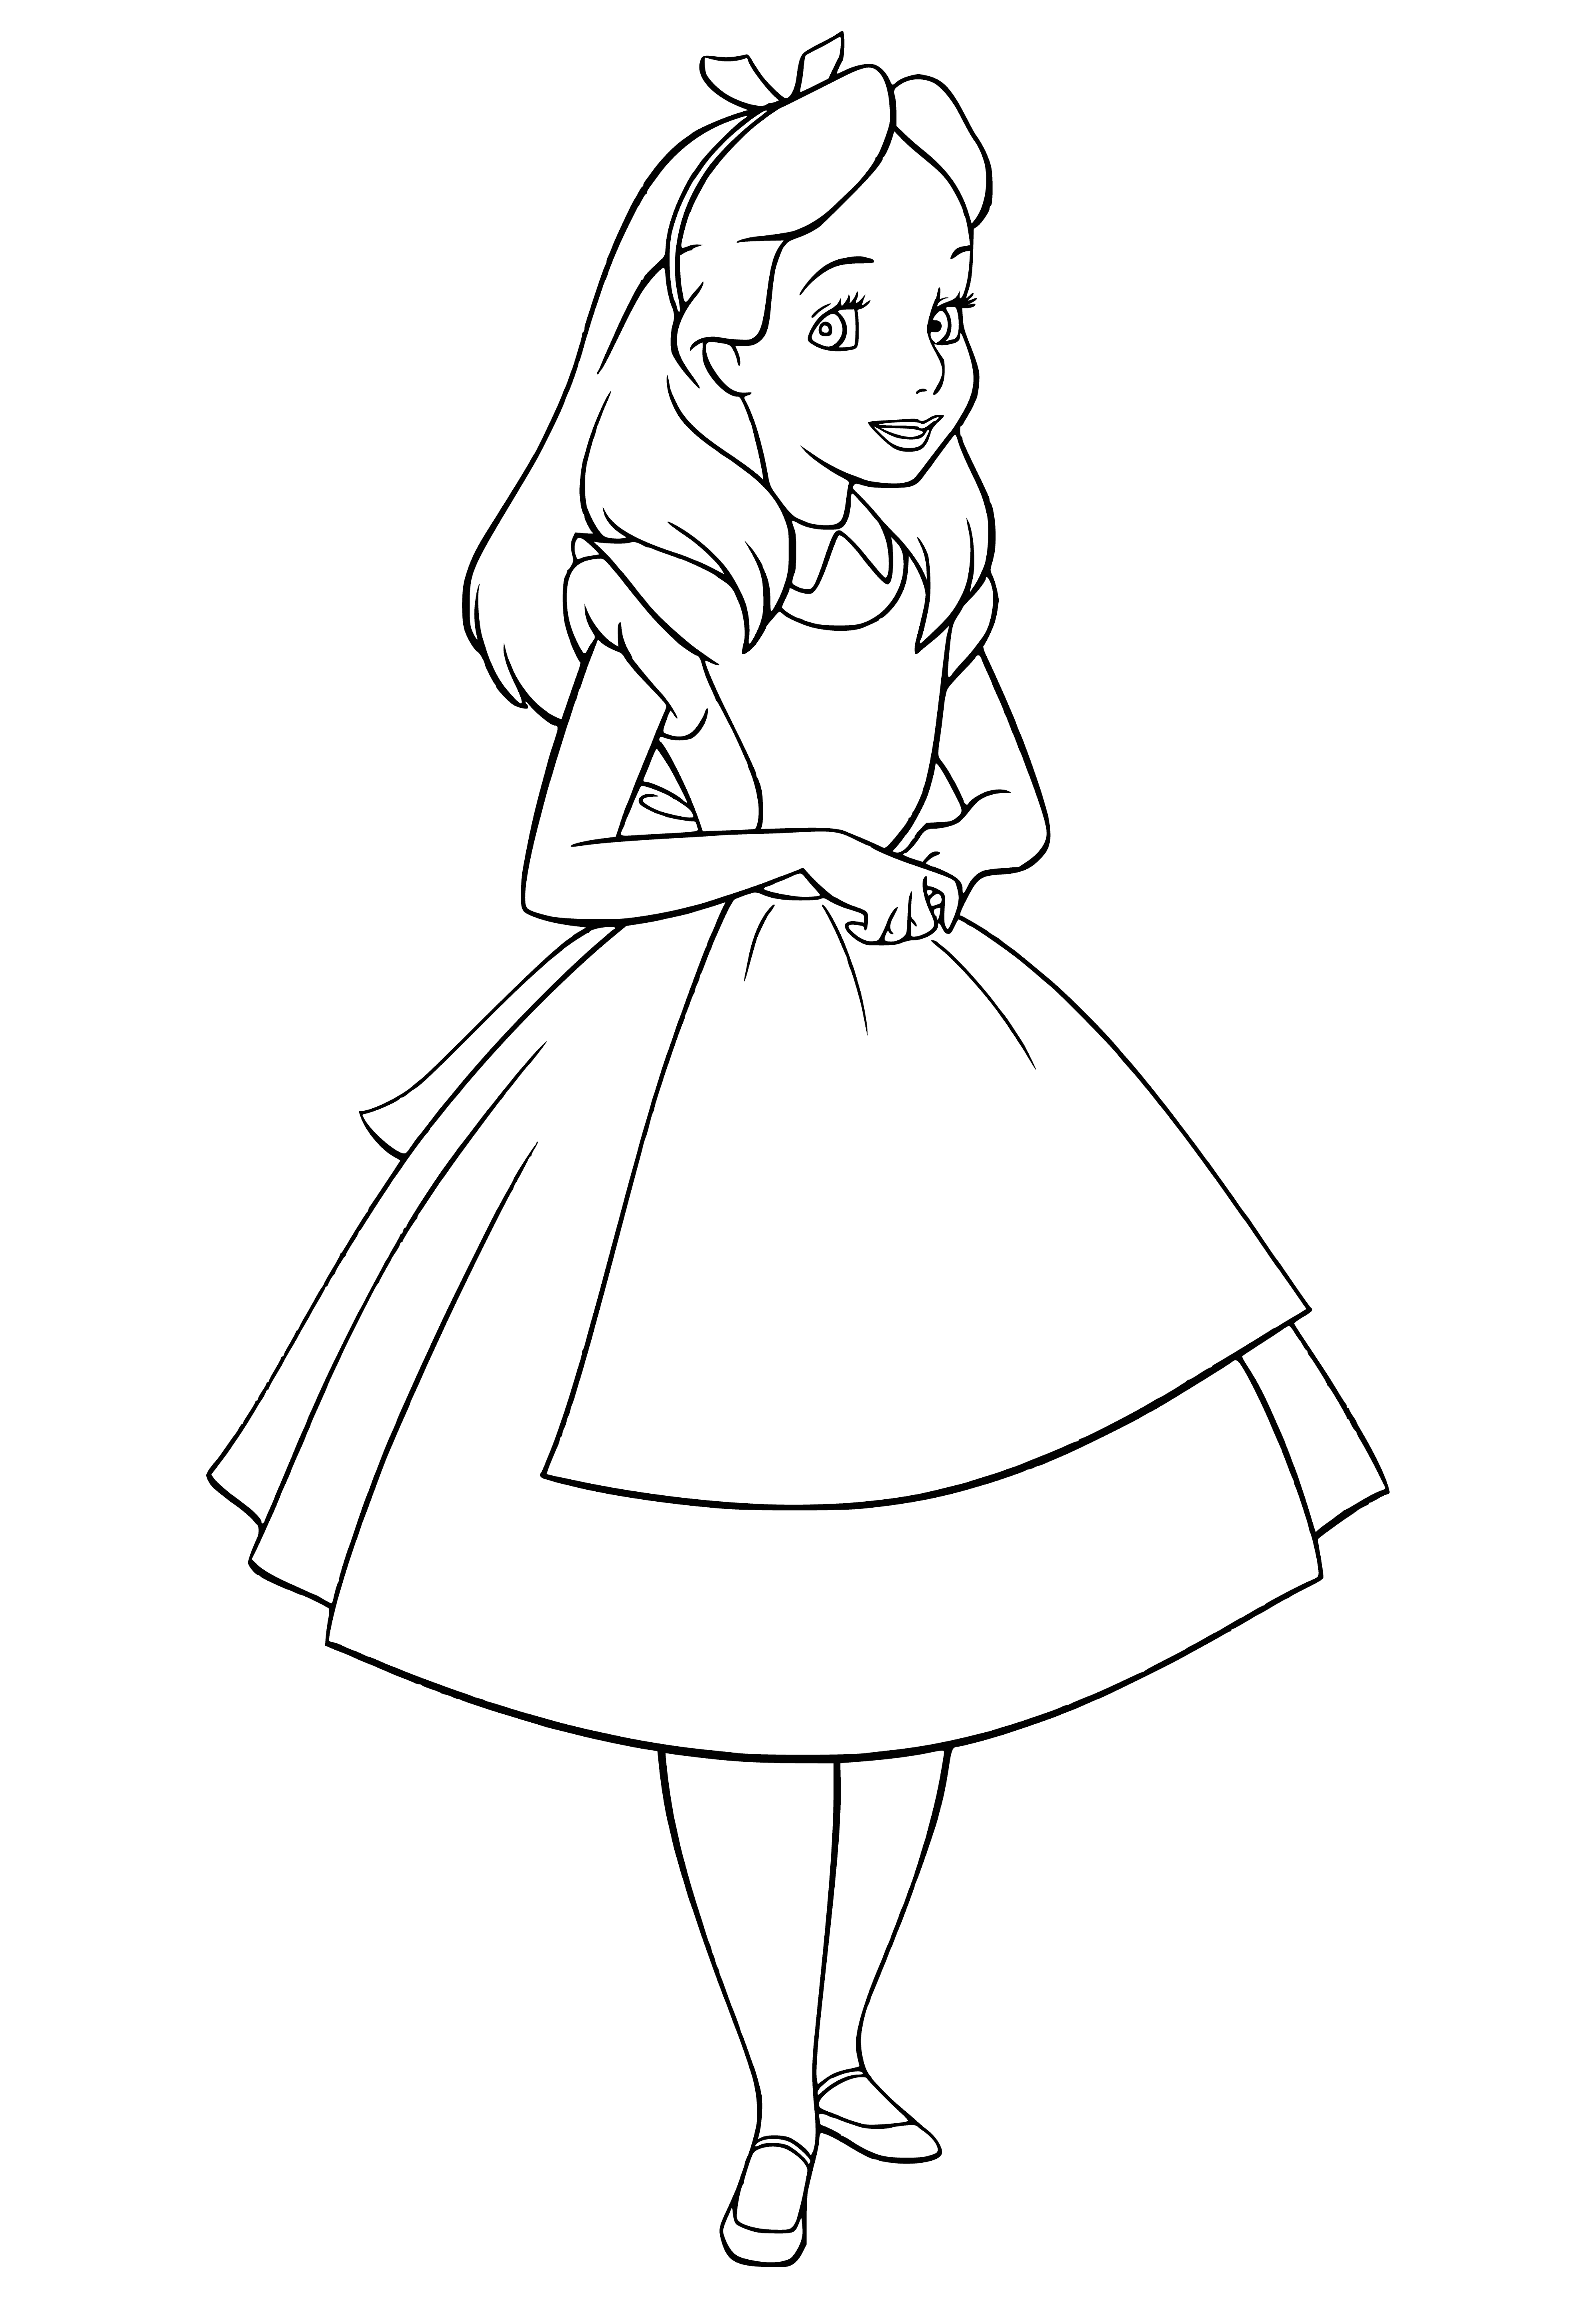 coloring page: Girl in coloring page is Alice, blonde hair, blue eyes, white dress, black belt & shoes, holding book in right hand.